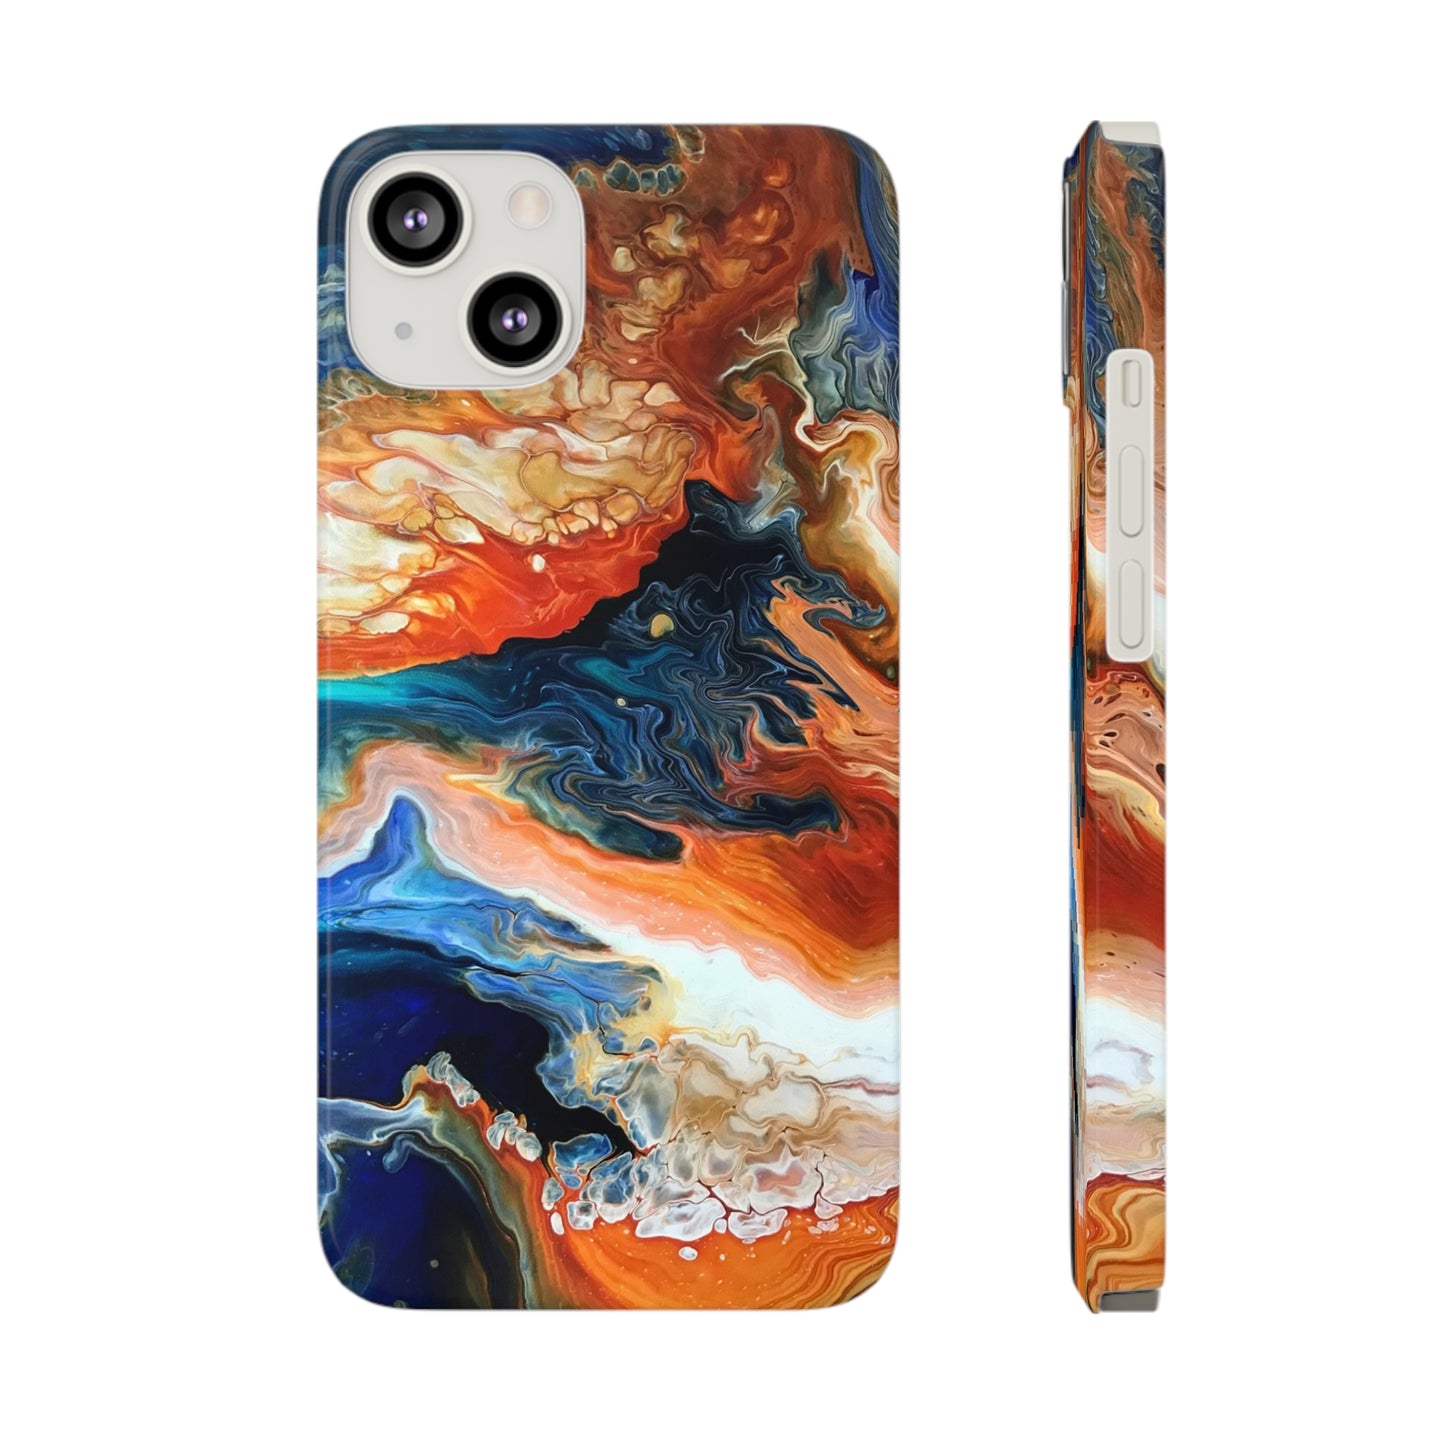 Southwest Scene Inspired Slim iPhone and Samsung Phone Cases